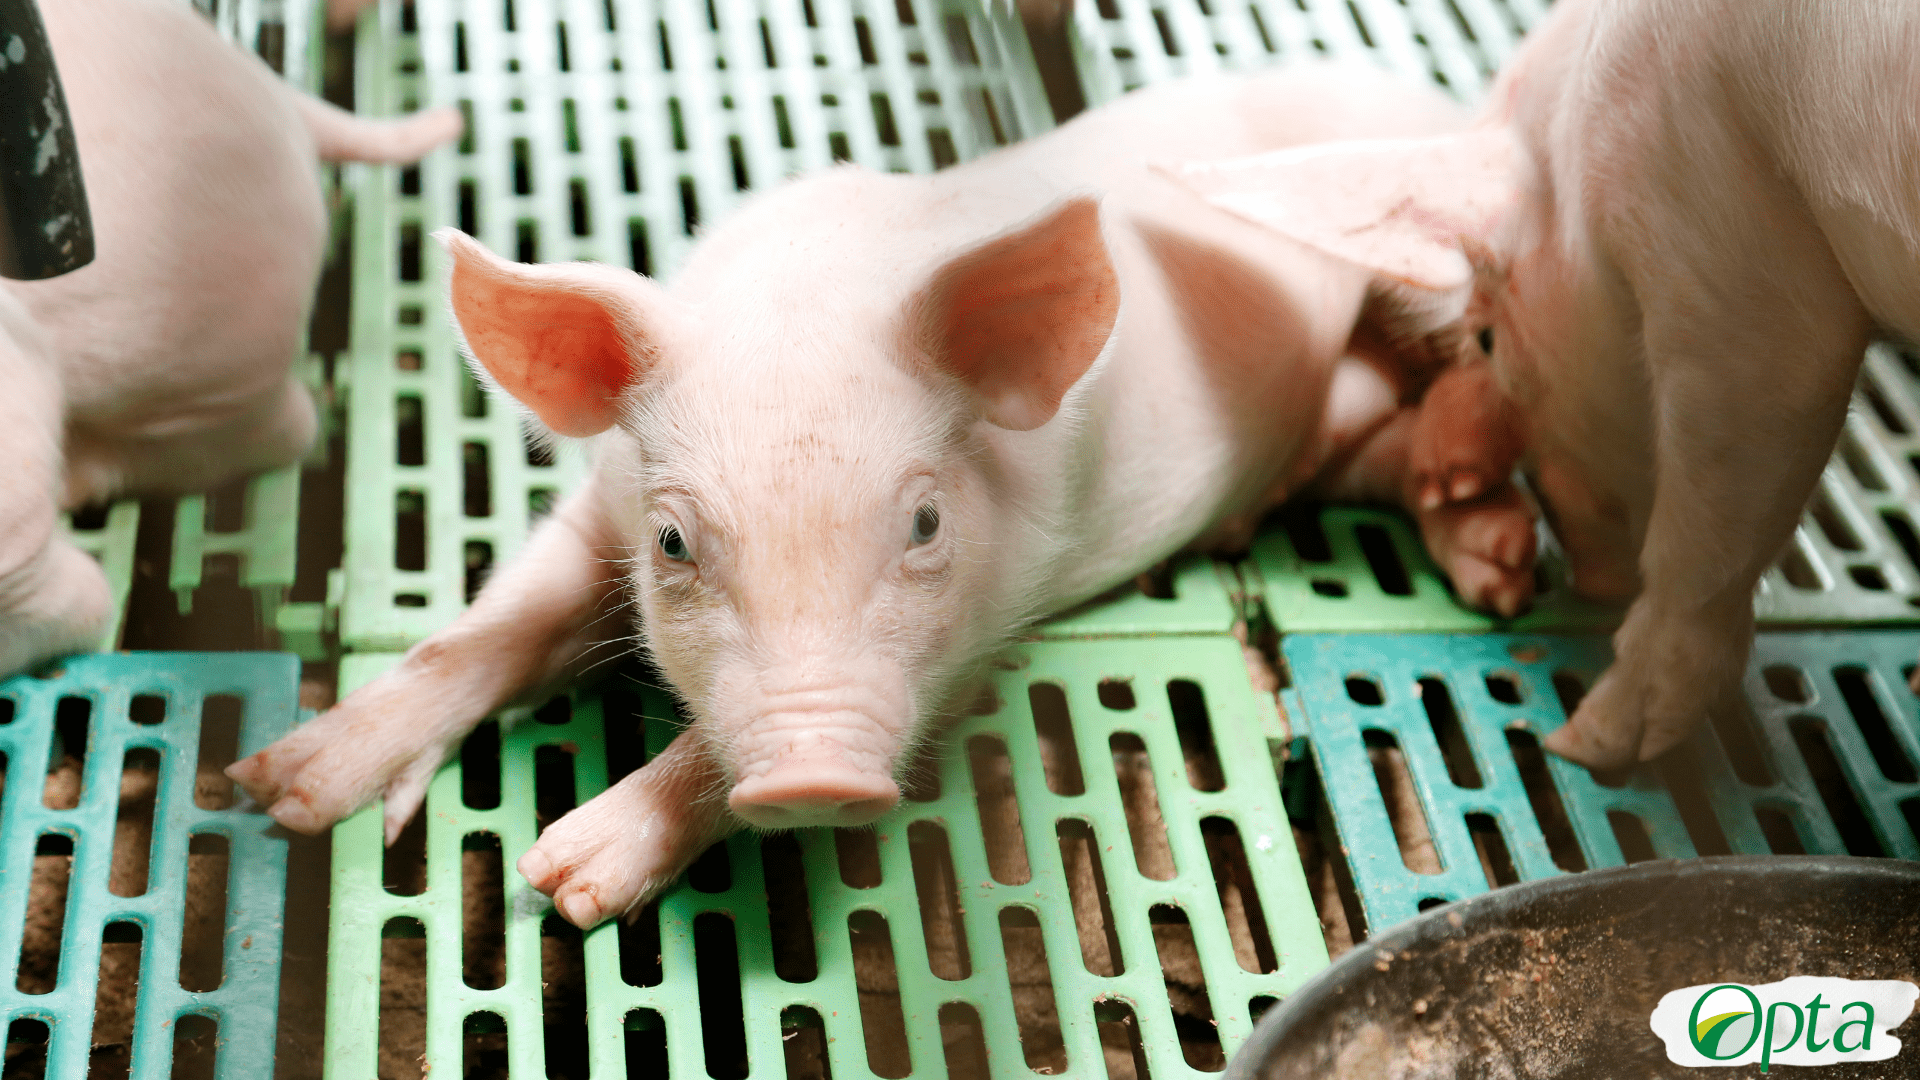 Whey for newly weaned piglets